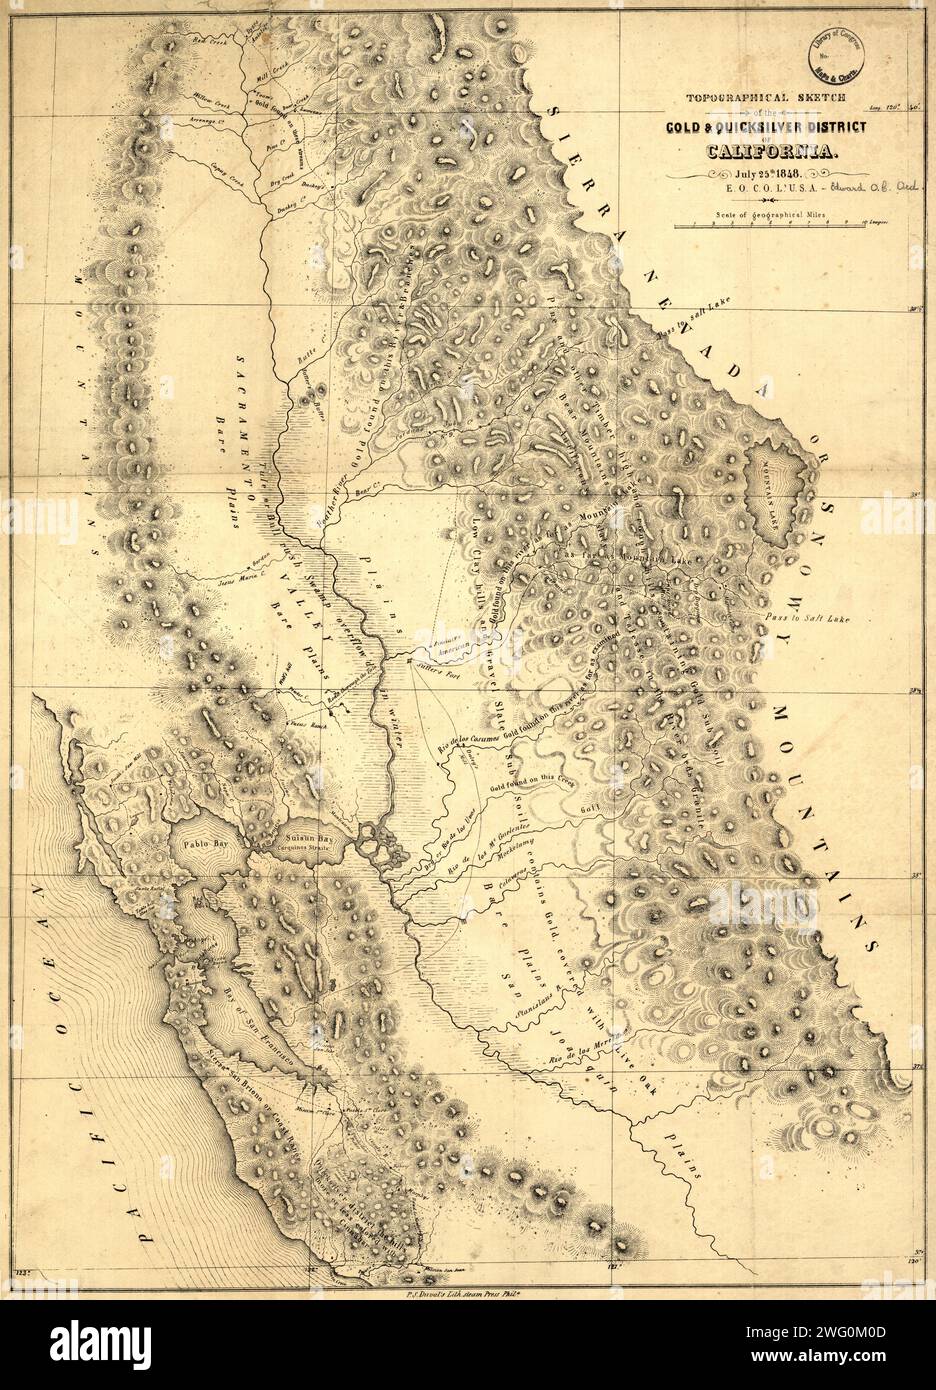 Topographical sketch of the gold &amp; quicksilver district of California, 1848. Published in July 1848 after the first gold strikes at Sutter's Mill on the American River in northern California, this map shows the location of key gold and quicksilver (mercury, in the form of cinnabar) deposits in the territory of California. Soon after the find, prospectors began streaming into California in enormous numbers, and demand was high for geographic knowledge of the region, especially as it related to previous strikes. The map displays the basic topography of California by showing mountains, rivers Stock Photo